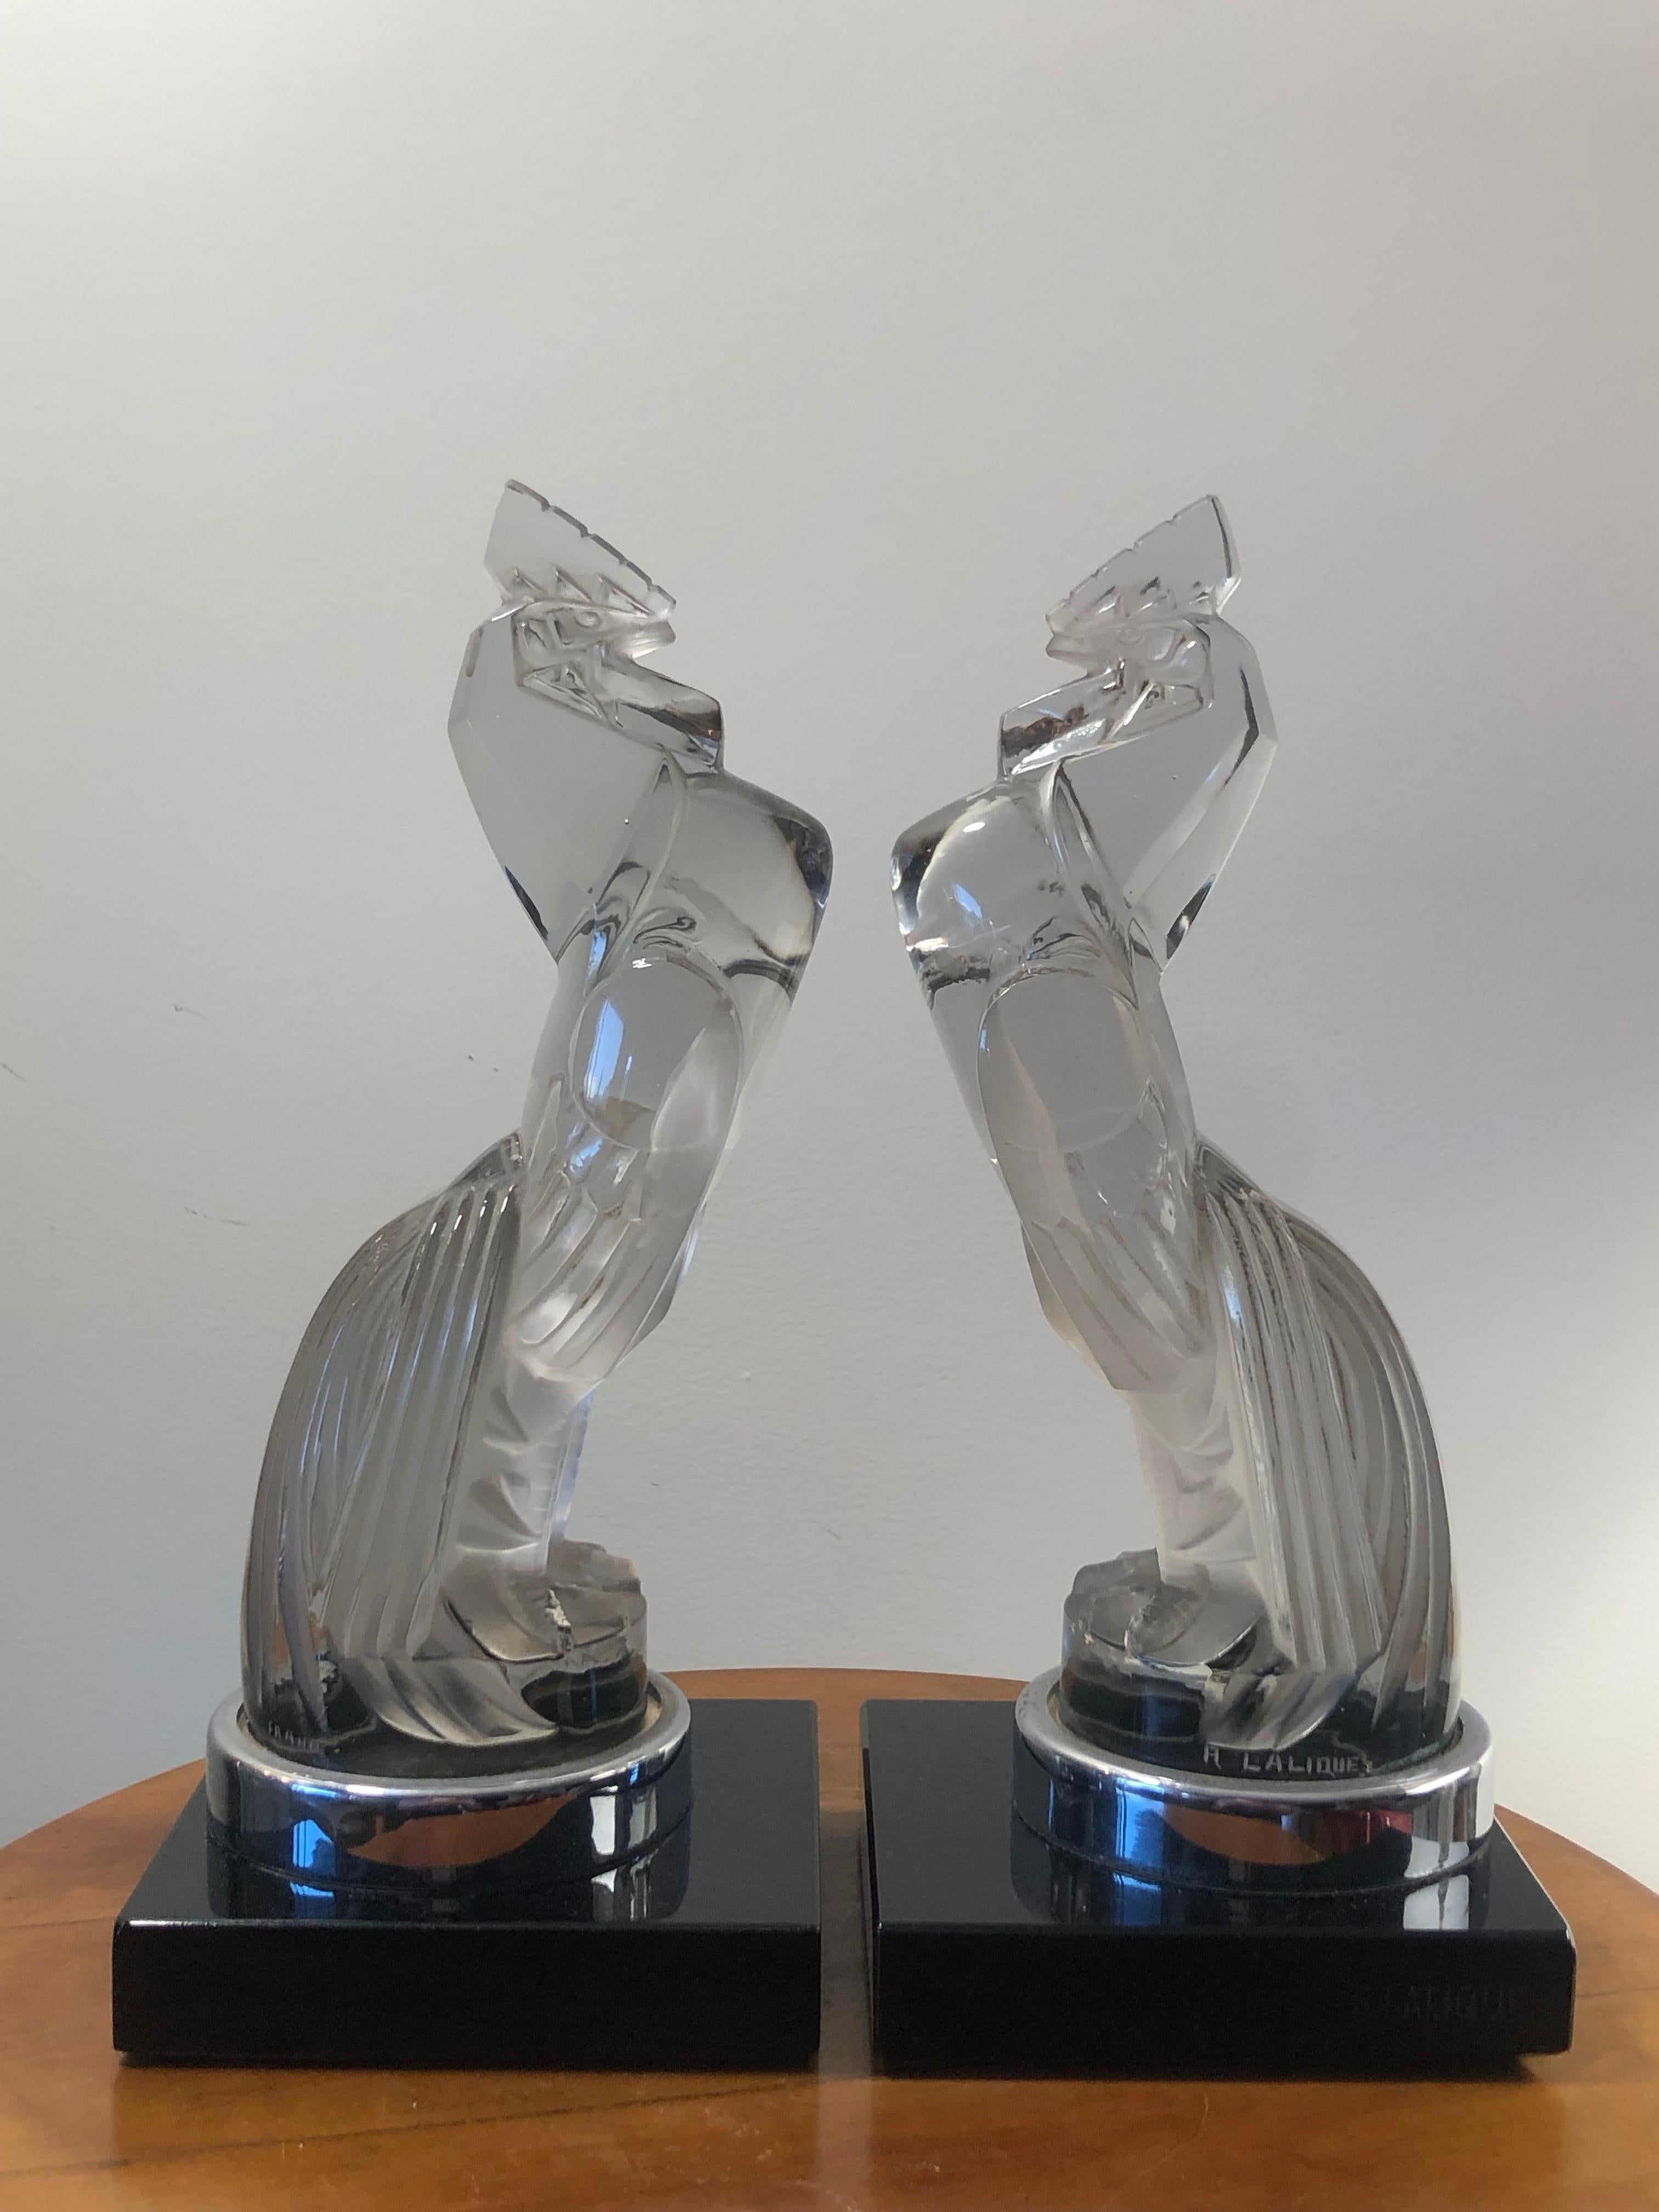 Art Deco 1929 Rene Lalique Pair of Coq Houdan Bookends on Black Glass Bases, Roosters